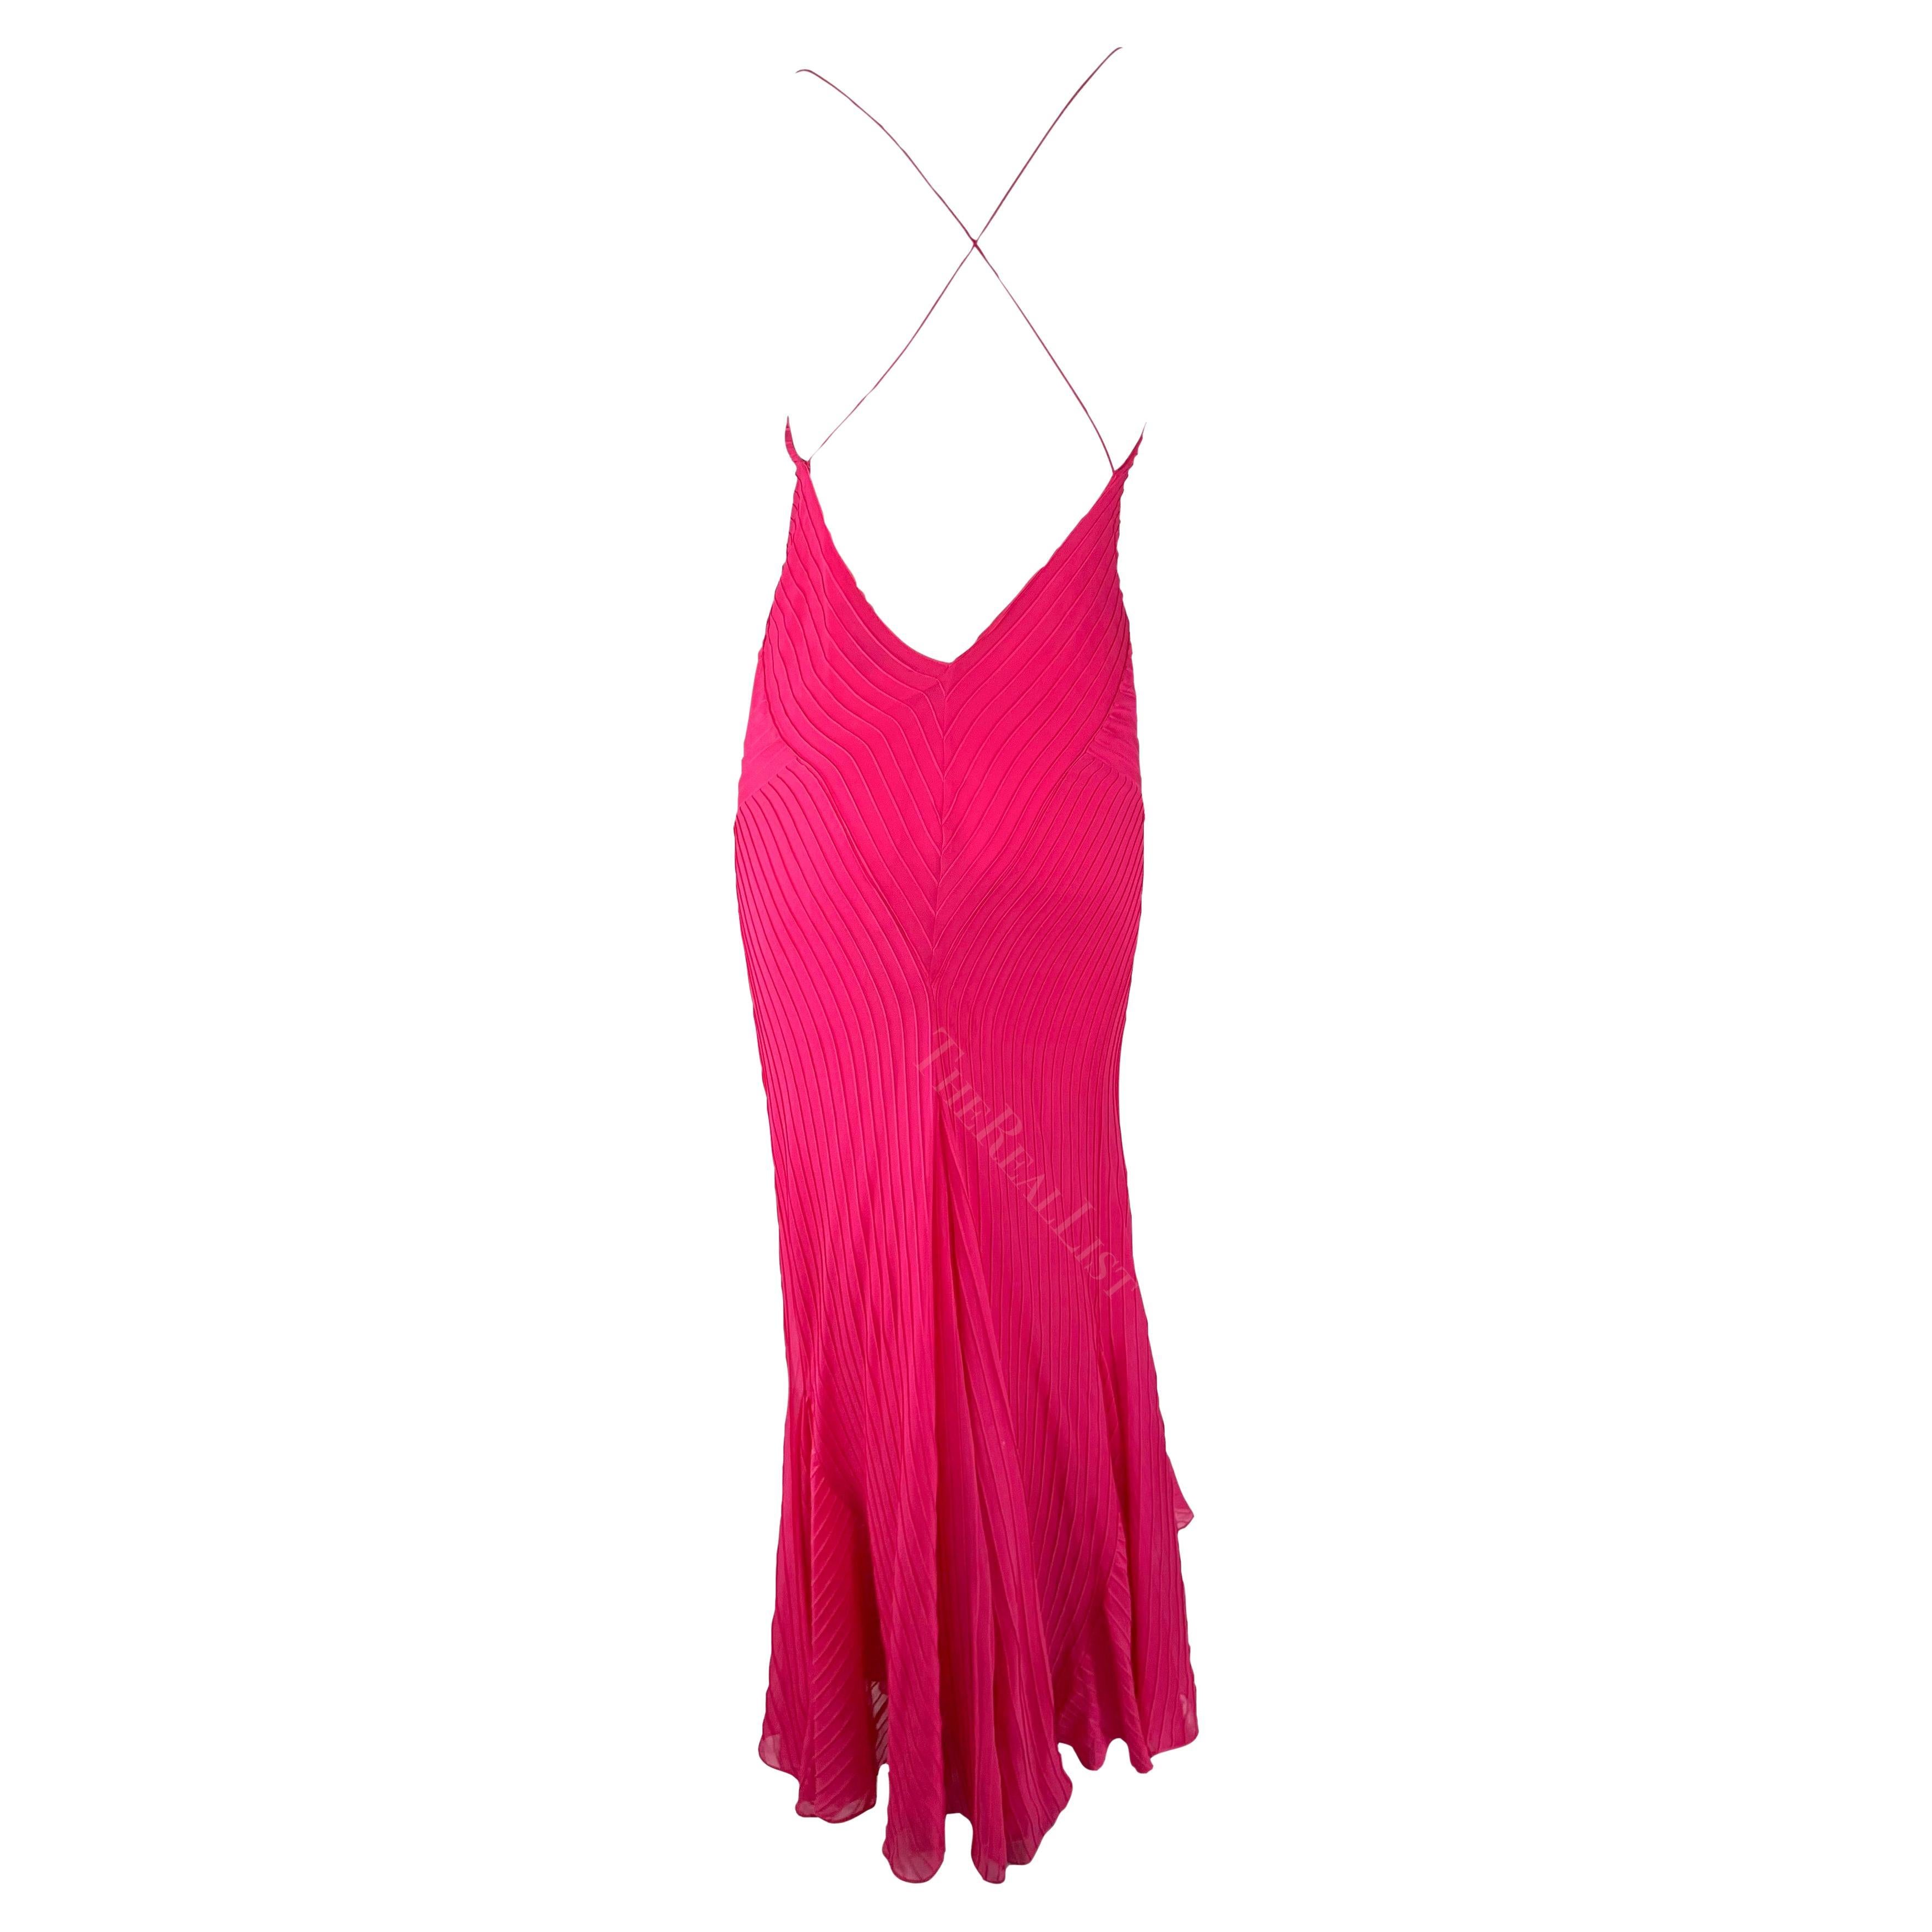 S/S 2004 Ralph Lauren Runway Hot Pink Pleated Chiffon Backless Cowl Gown 10